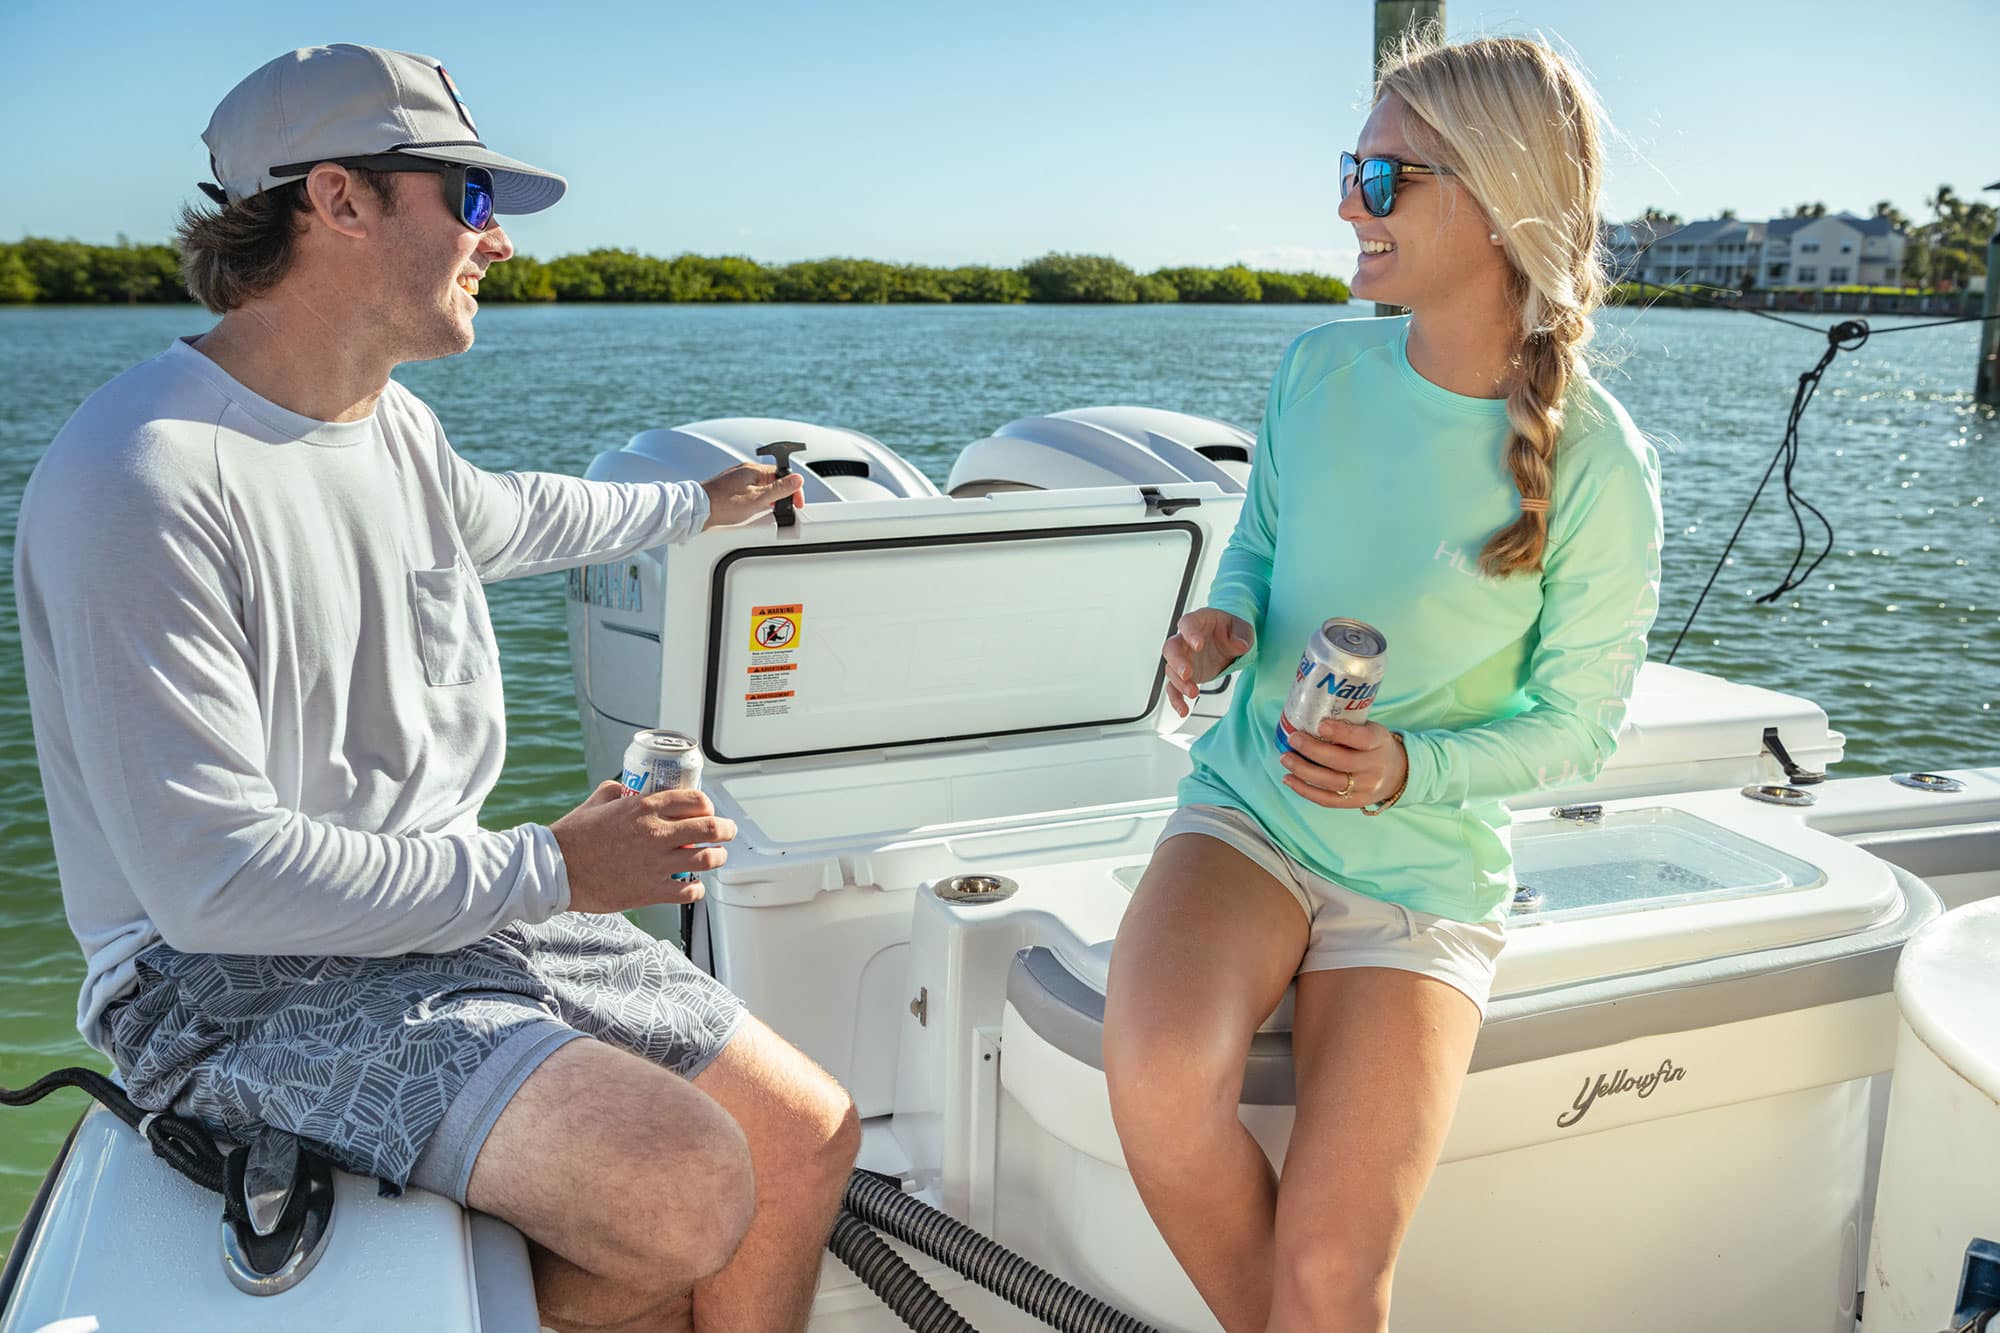 Huk's Waypoint Line Offers Protection for Both the Angler and the